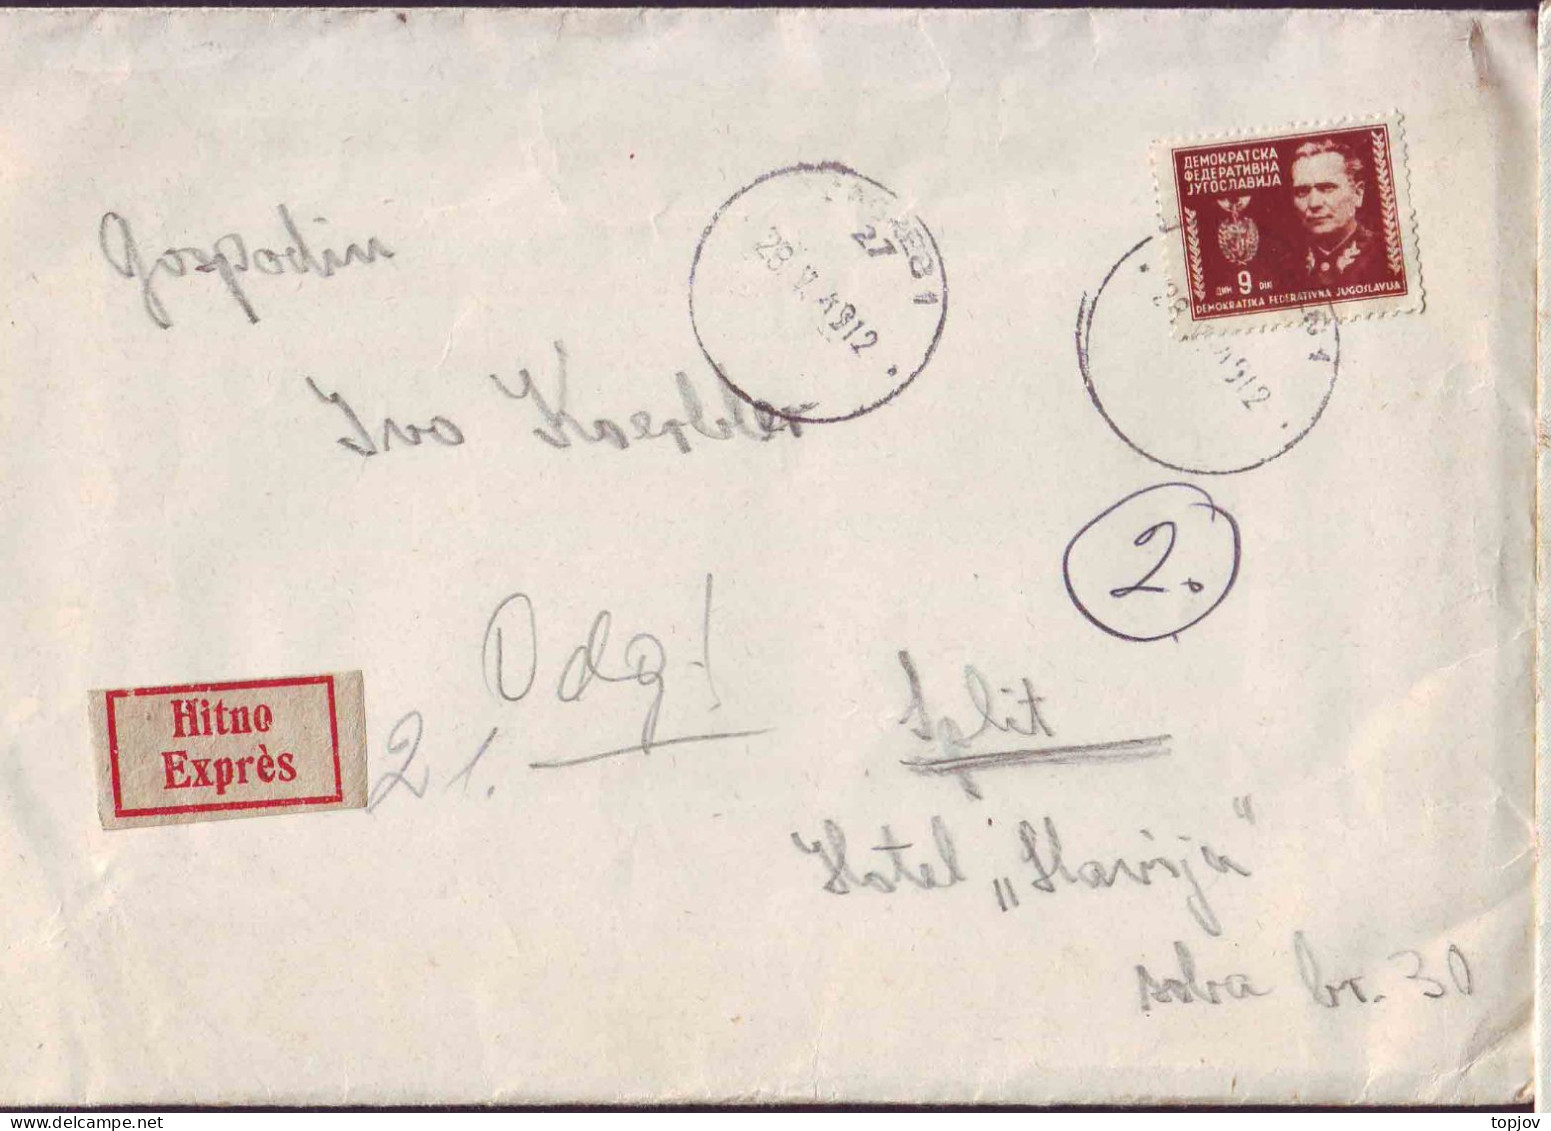 JUGOSLAVIA - EXPRES. Letter  9din TITO  On Yellow Paper  BANJA LUKA To ZAGREB - 1949 - Luchtpost